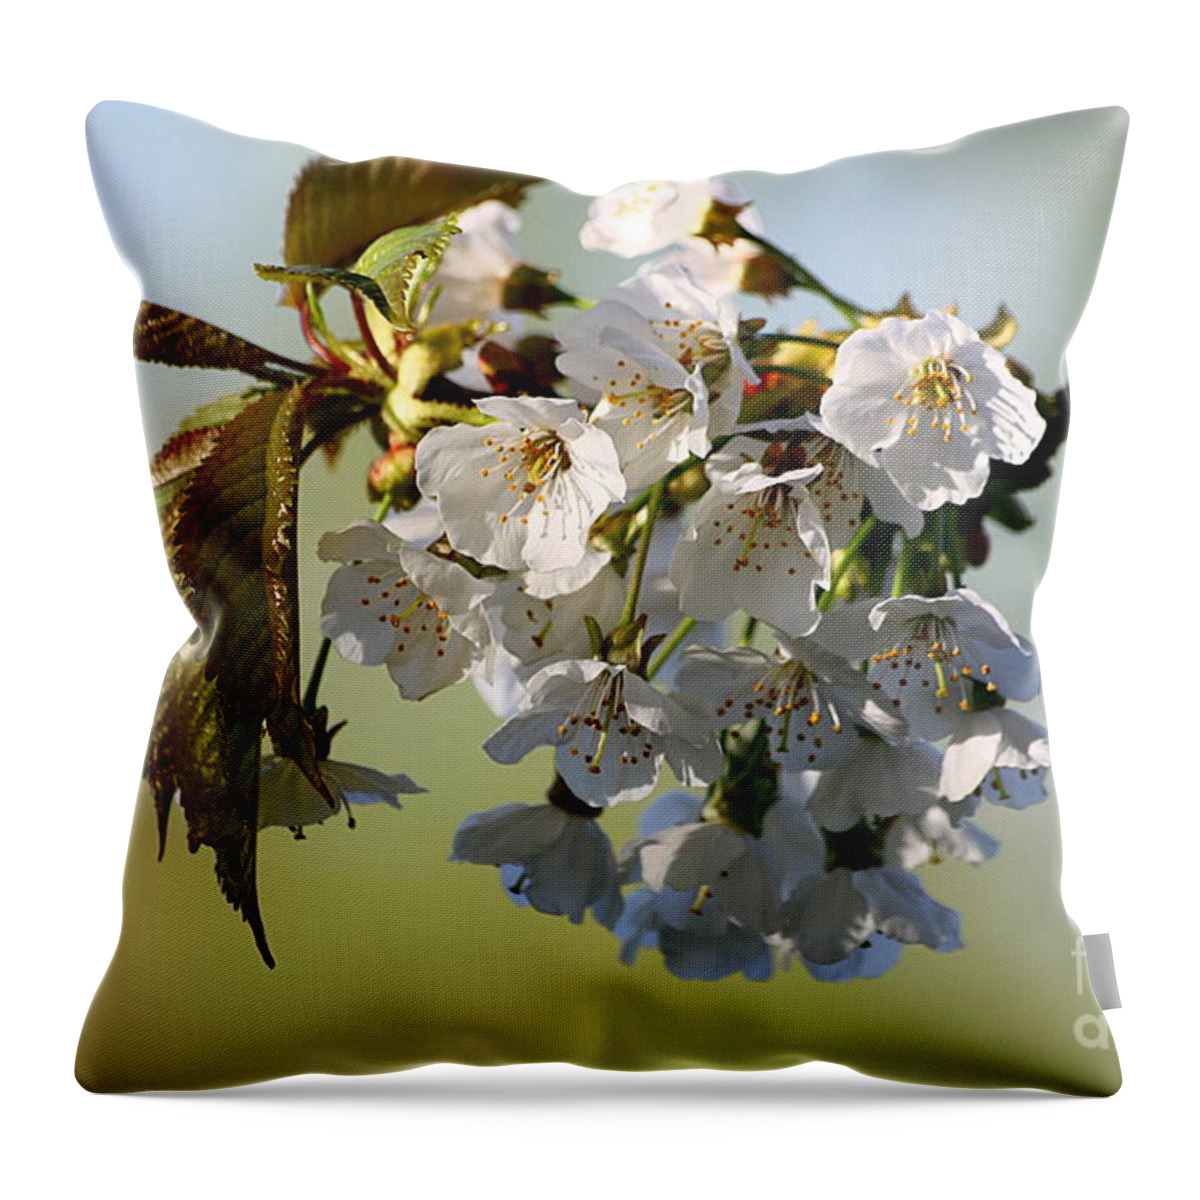 St James Lake Throw Pillow featuring the photograph More Spring Flowers by Jeremy Hayden